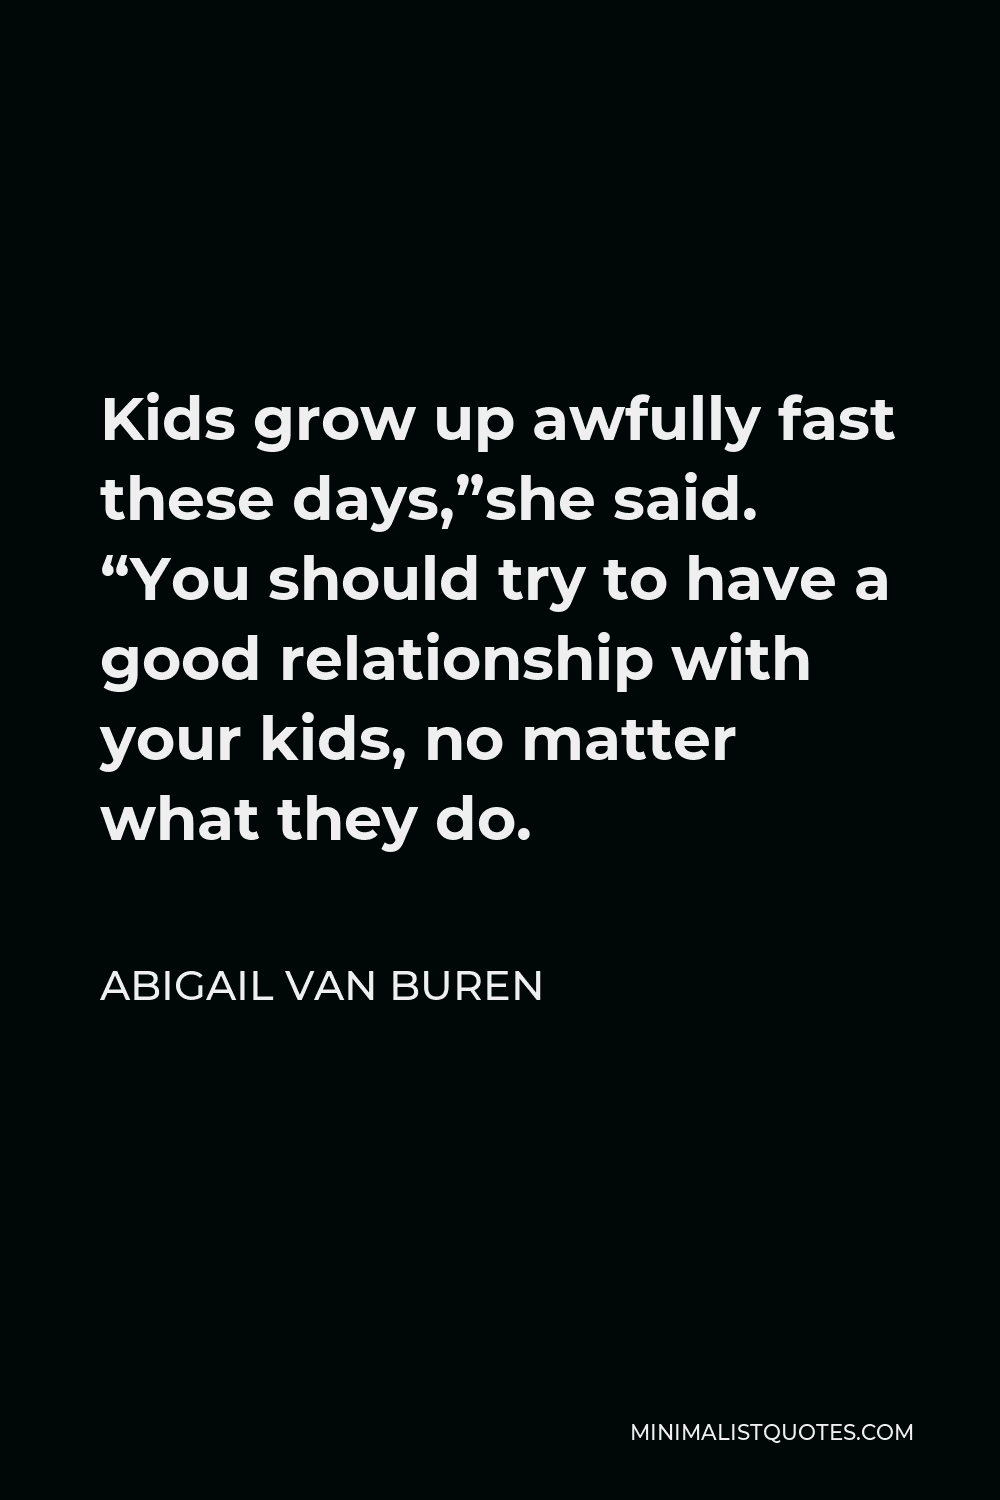 Abigail Van Buren Quote - Kids grow up awfully fast these days,”she said. “You should try to have a good relationship with your kids, no matter what they do.